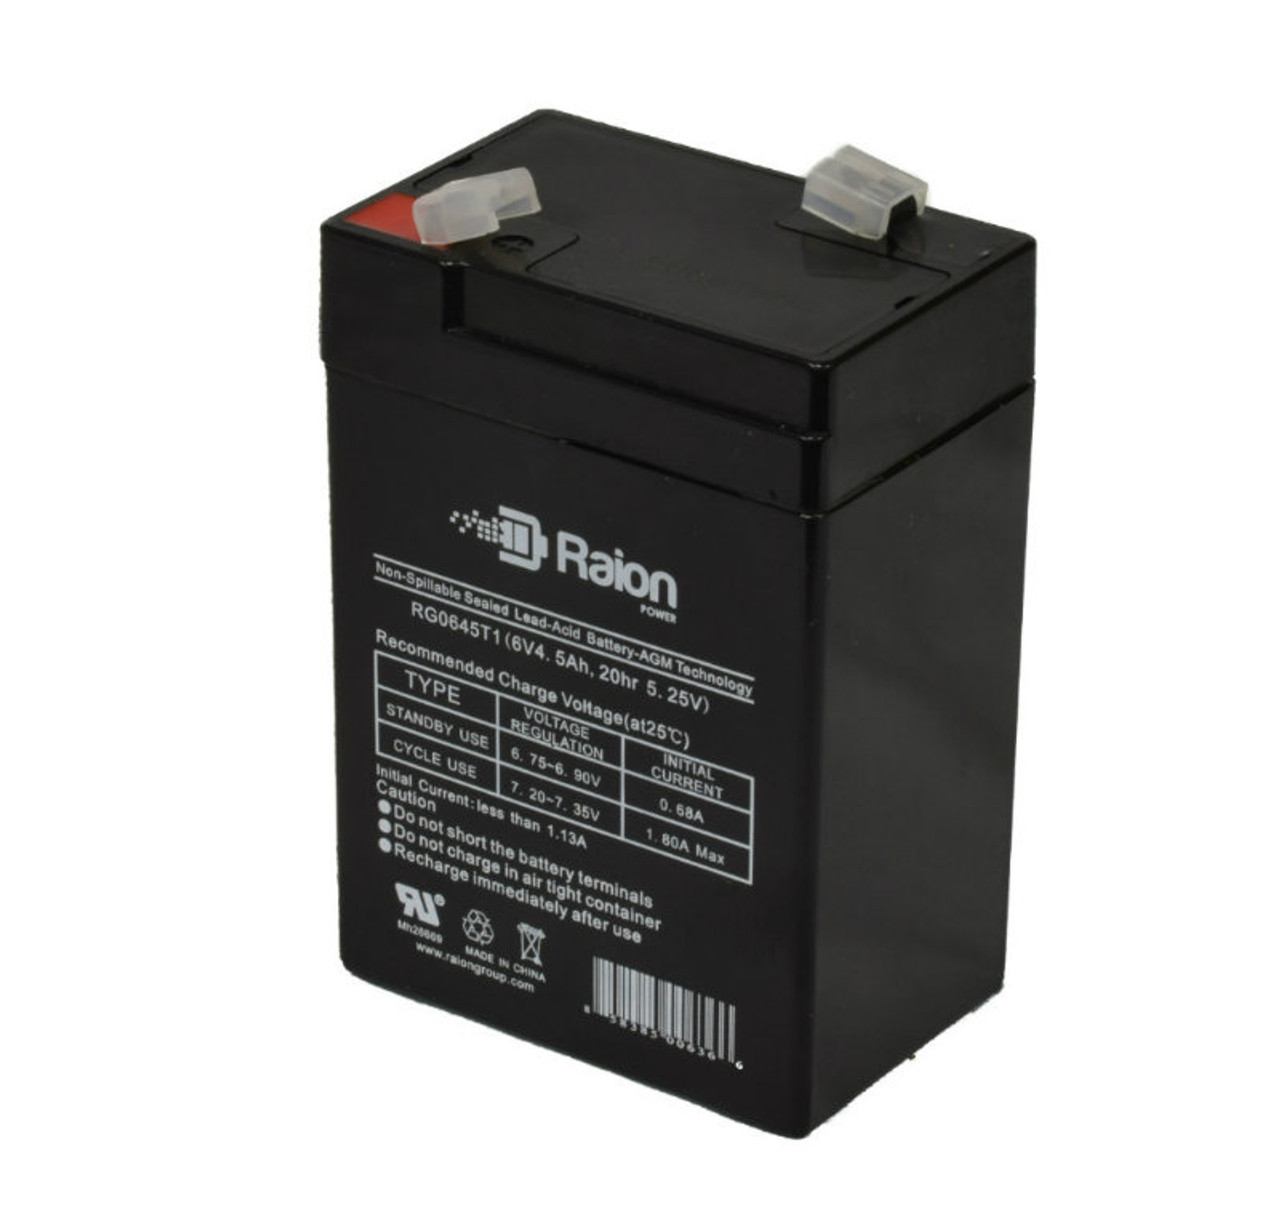 Raion Power RG0645T1 6V 4.5Ah Replacement Battery Cartridge for Kalee KL40040